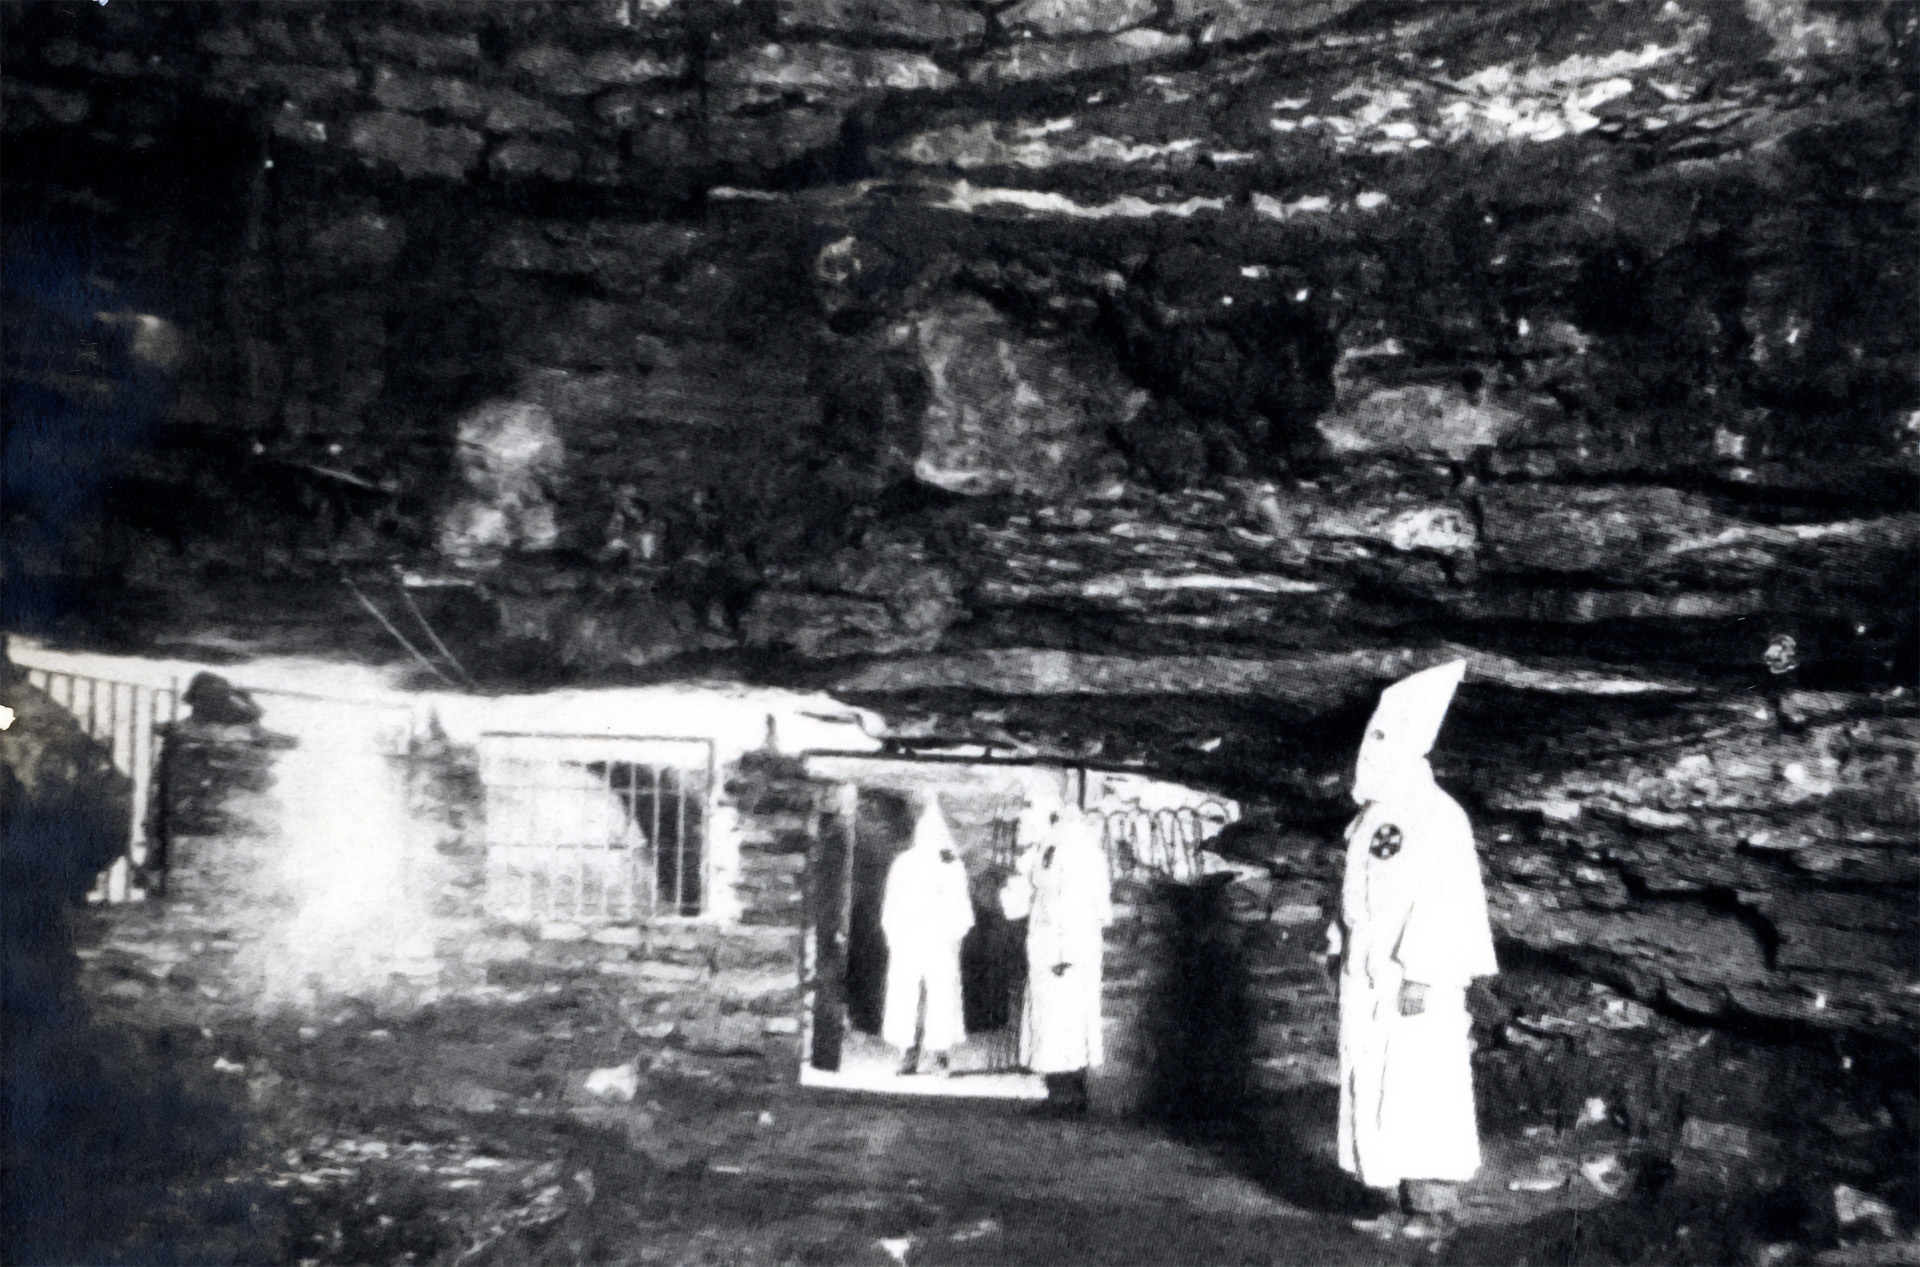 The Ku Klux Klan (KKK) owned the Fantastic Caverns from 1924 to 1930. During this time, they held meetings inside the cave.